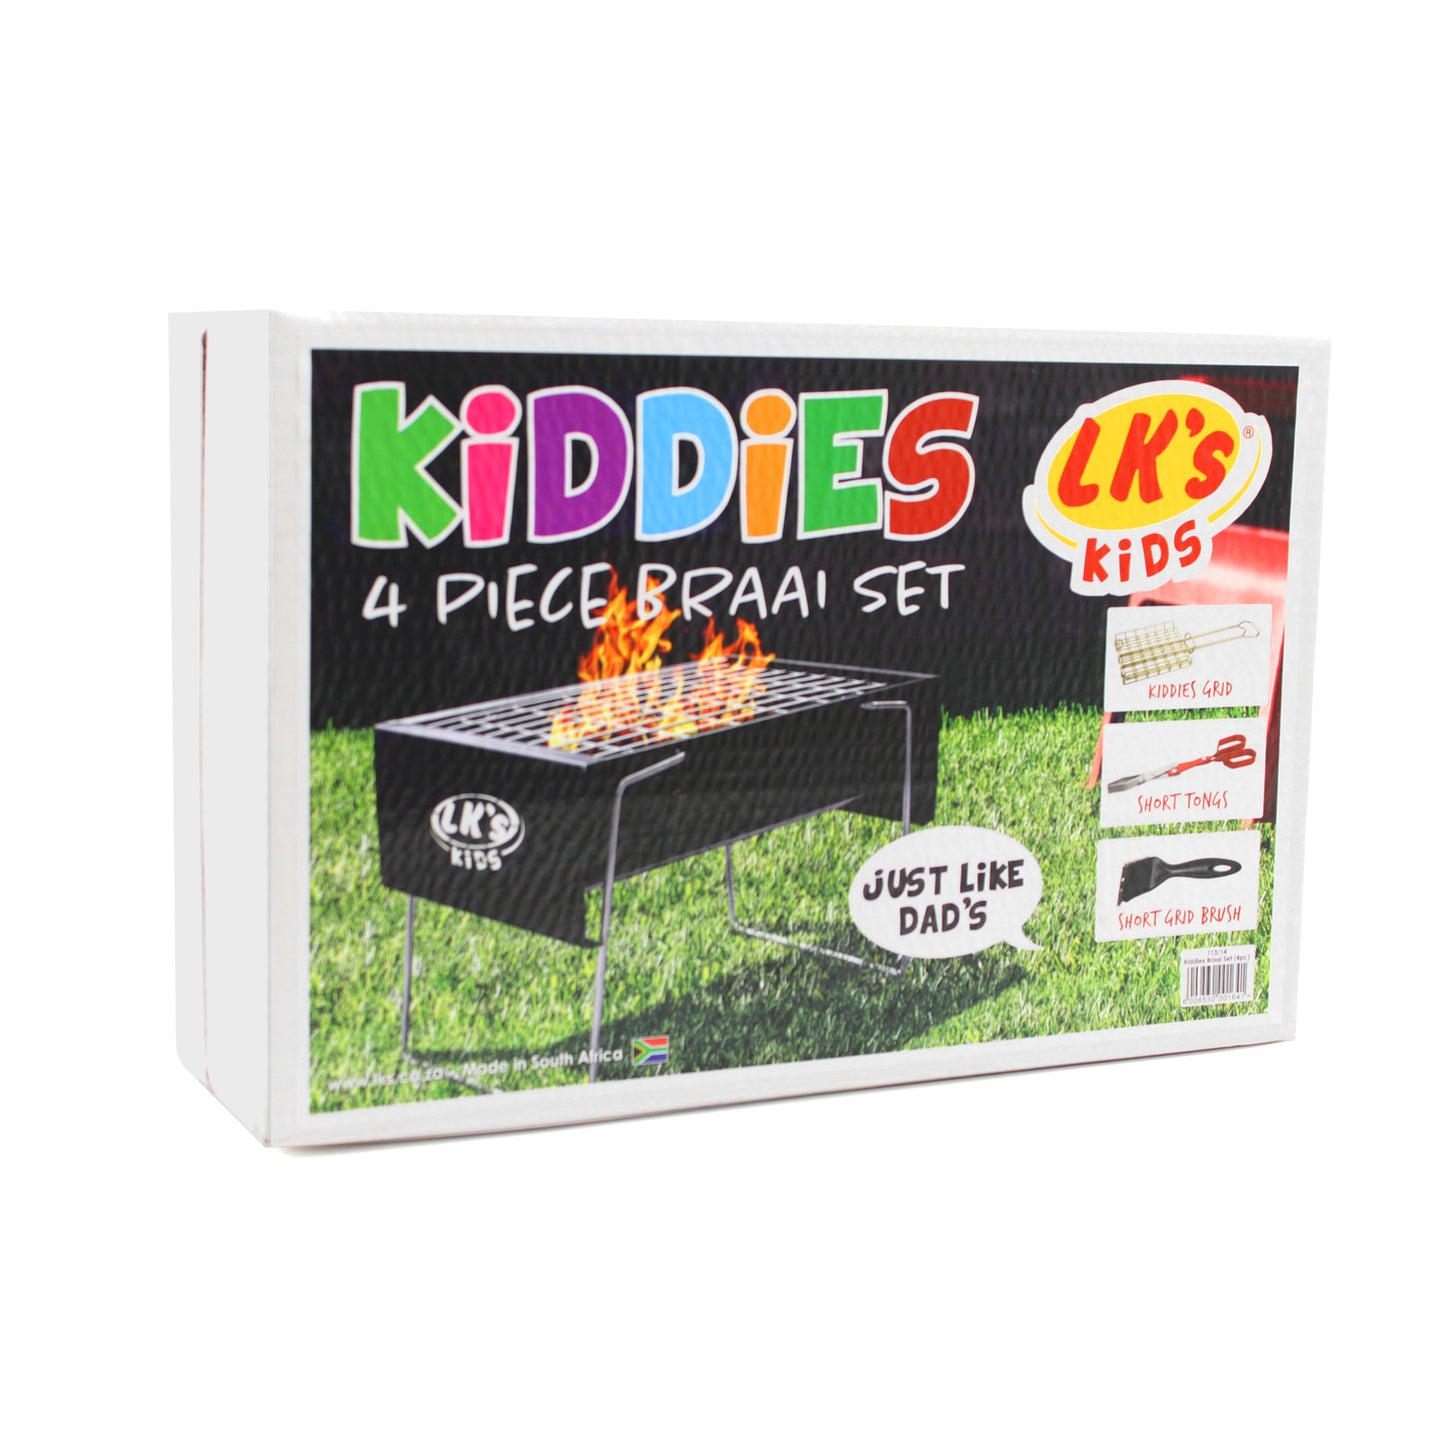 LK's Barbecue for Kids Box